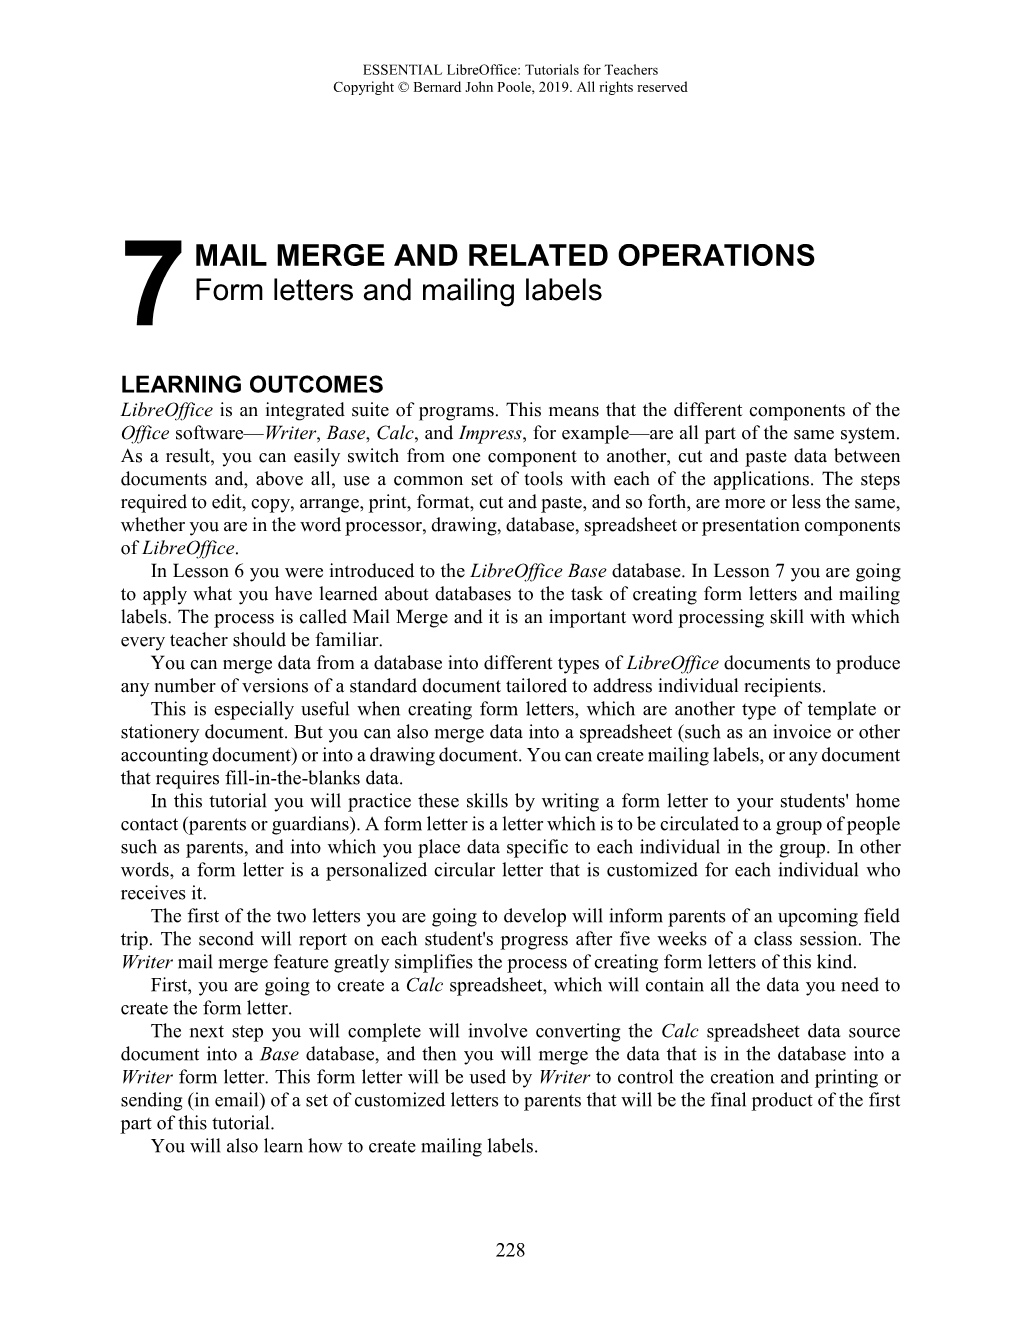 7 Mail Merge and Related Operations